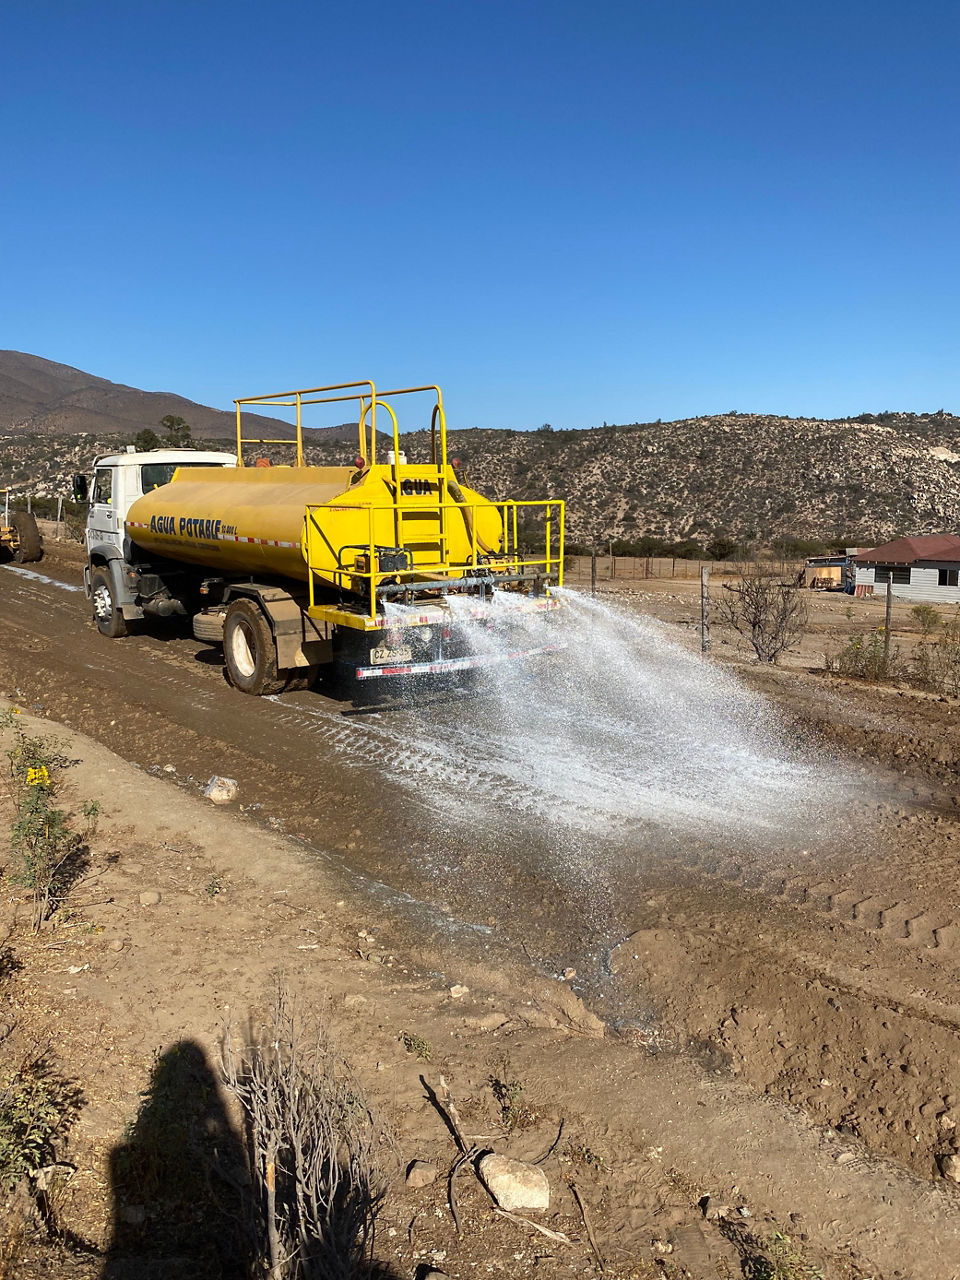 Yellow truck spraying polymer solution on dirt road